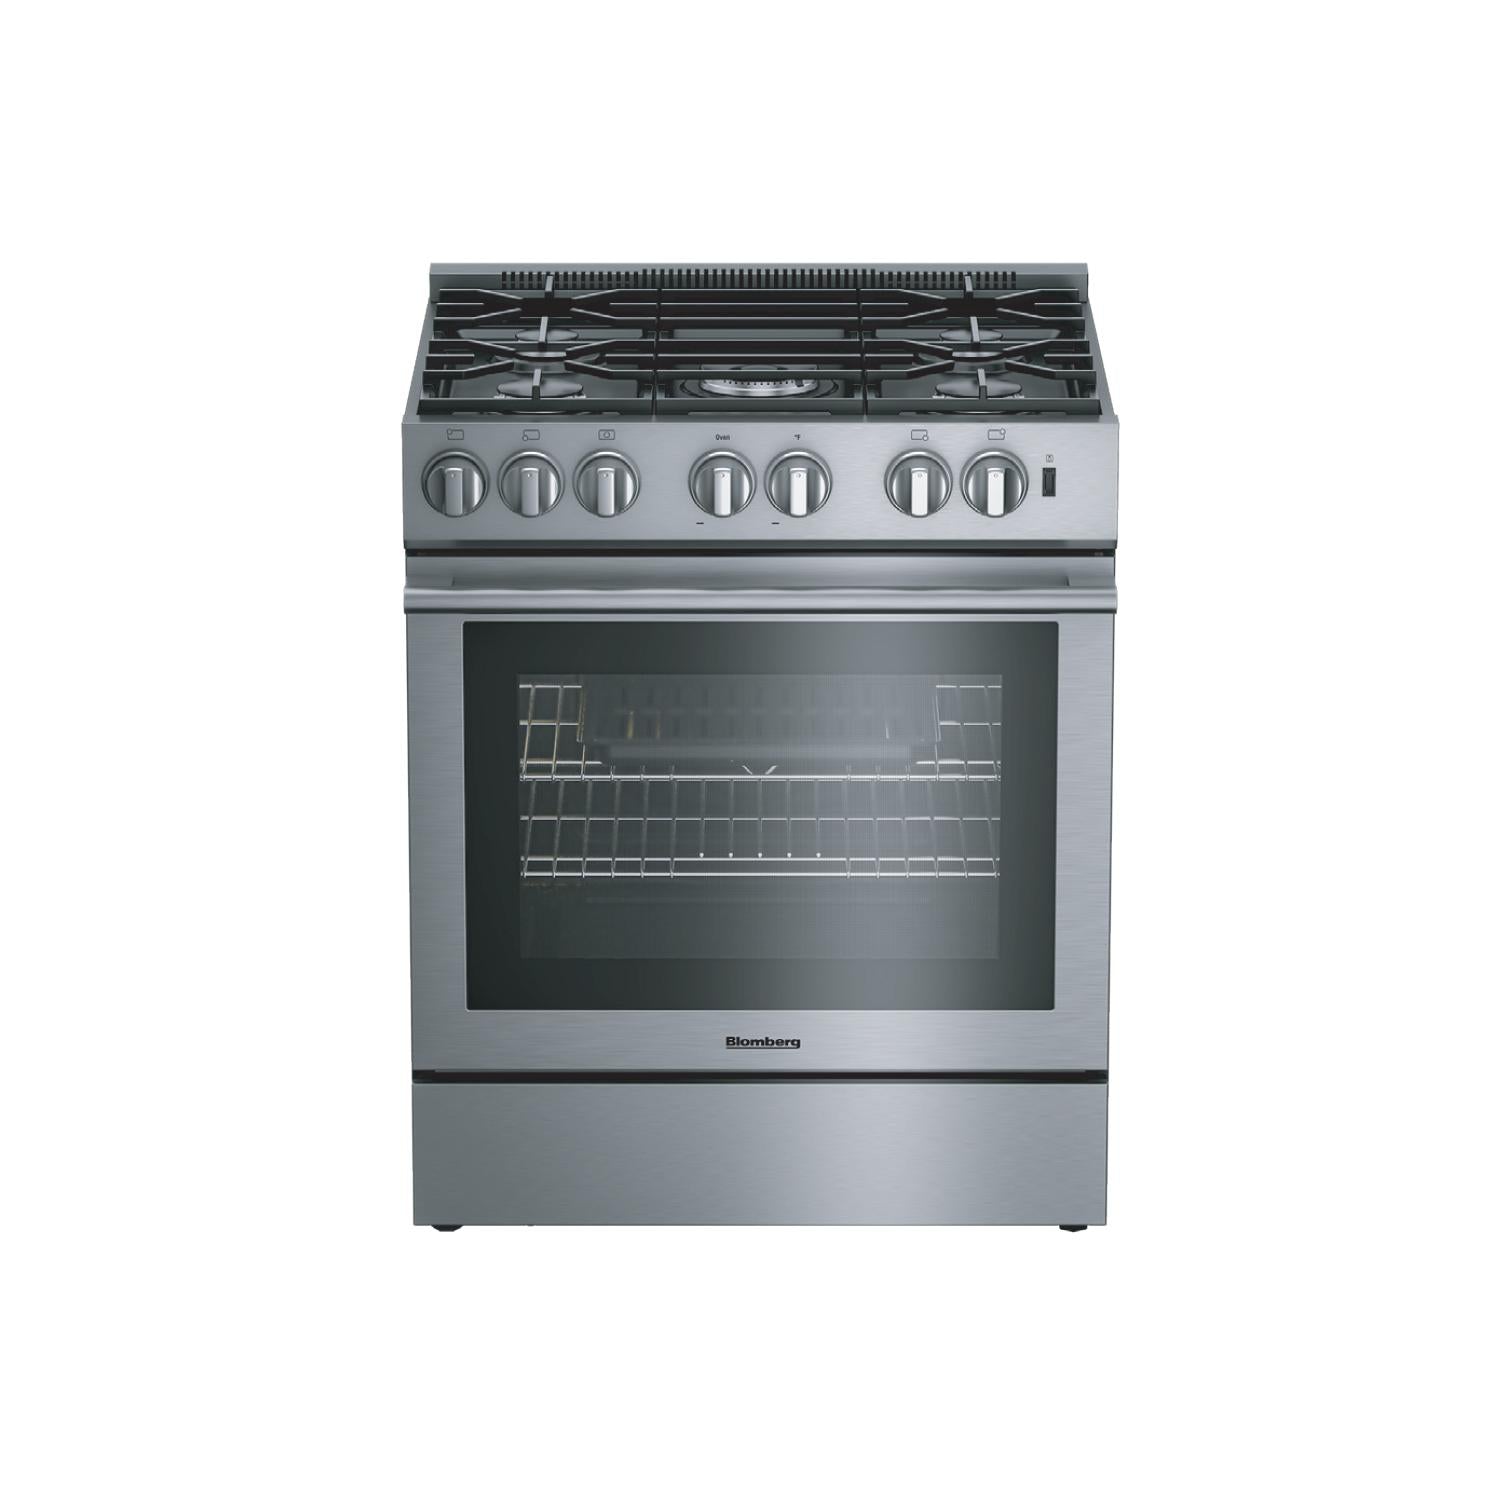 Blomberg Appliances 30in Dual Fuel 5 burner range with 5.7 cu ft self clean oven, slide-in style